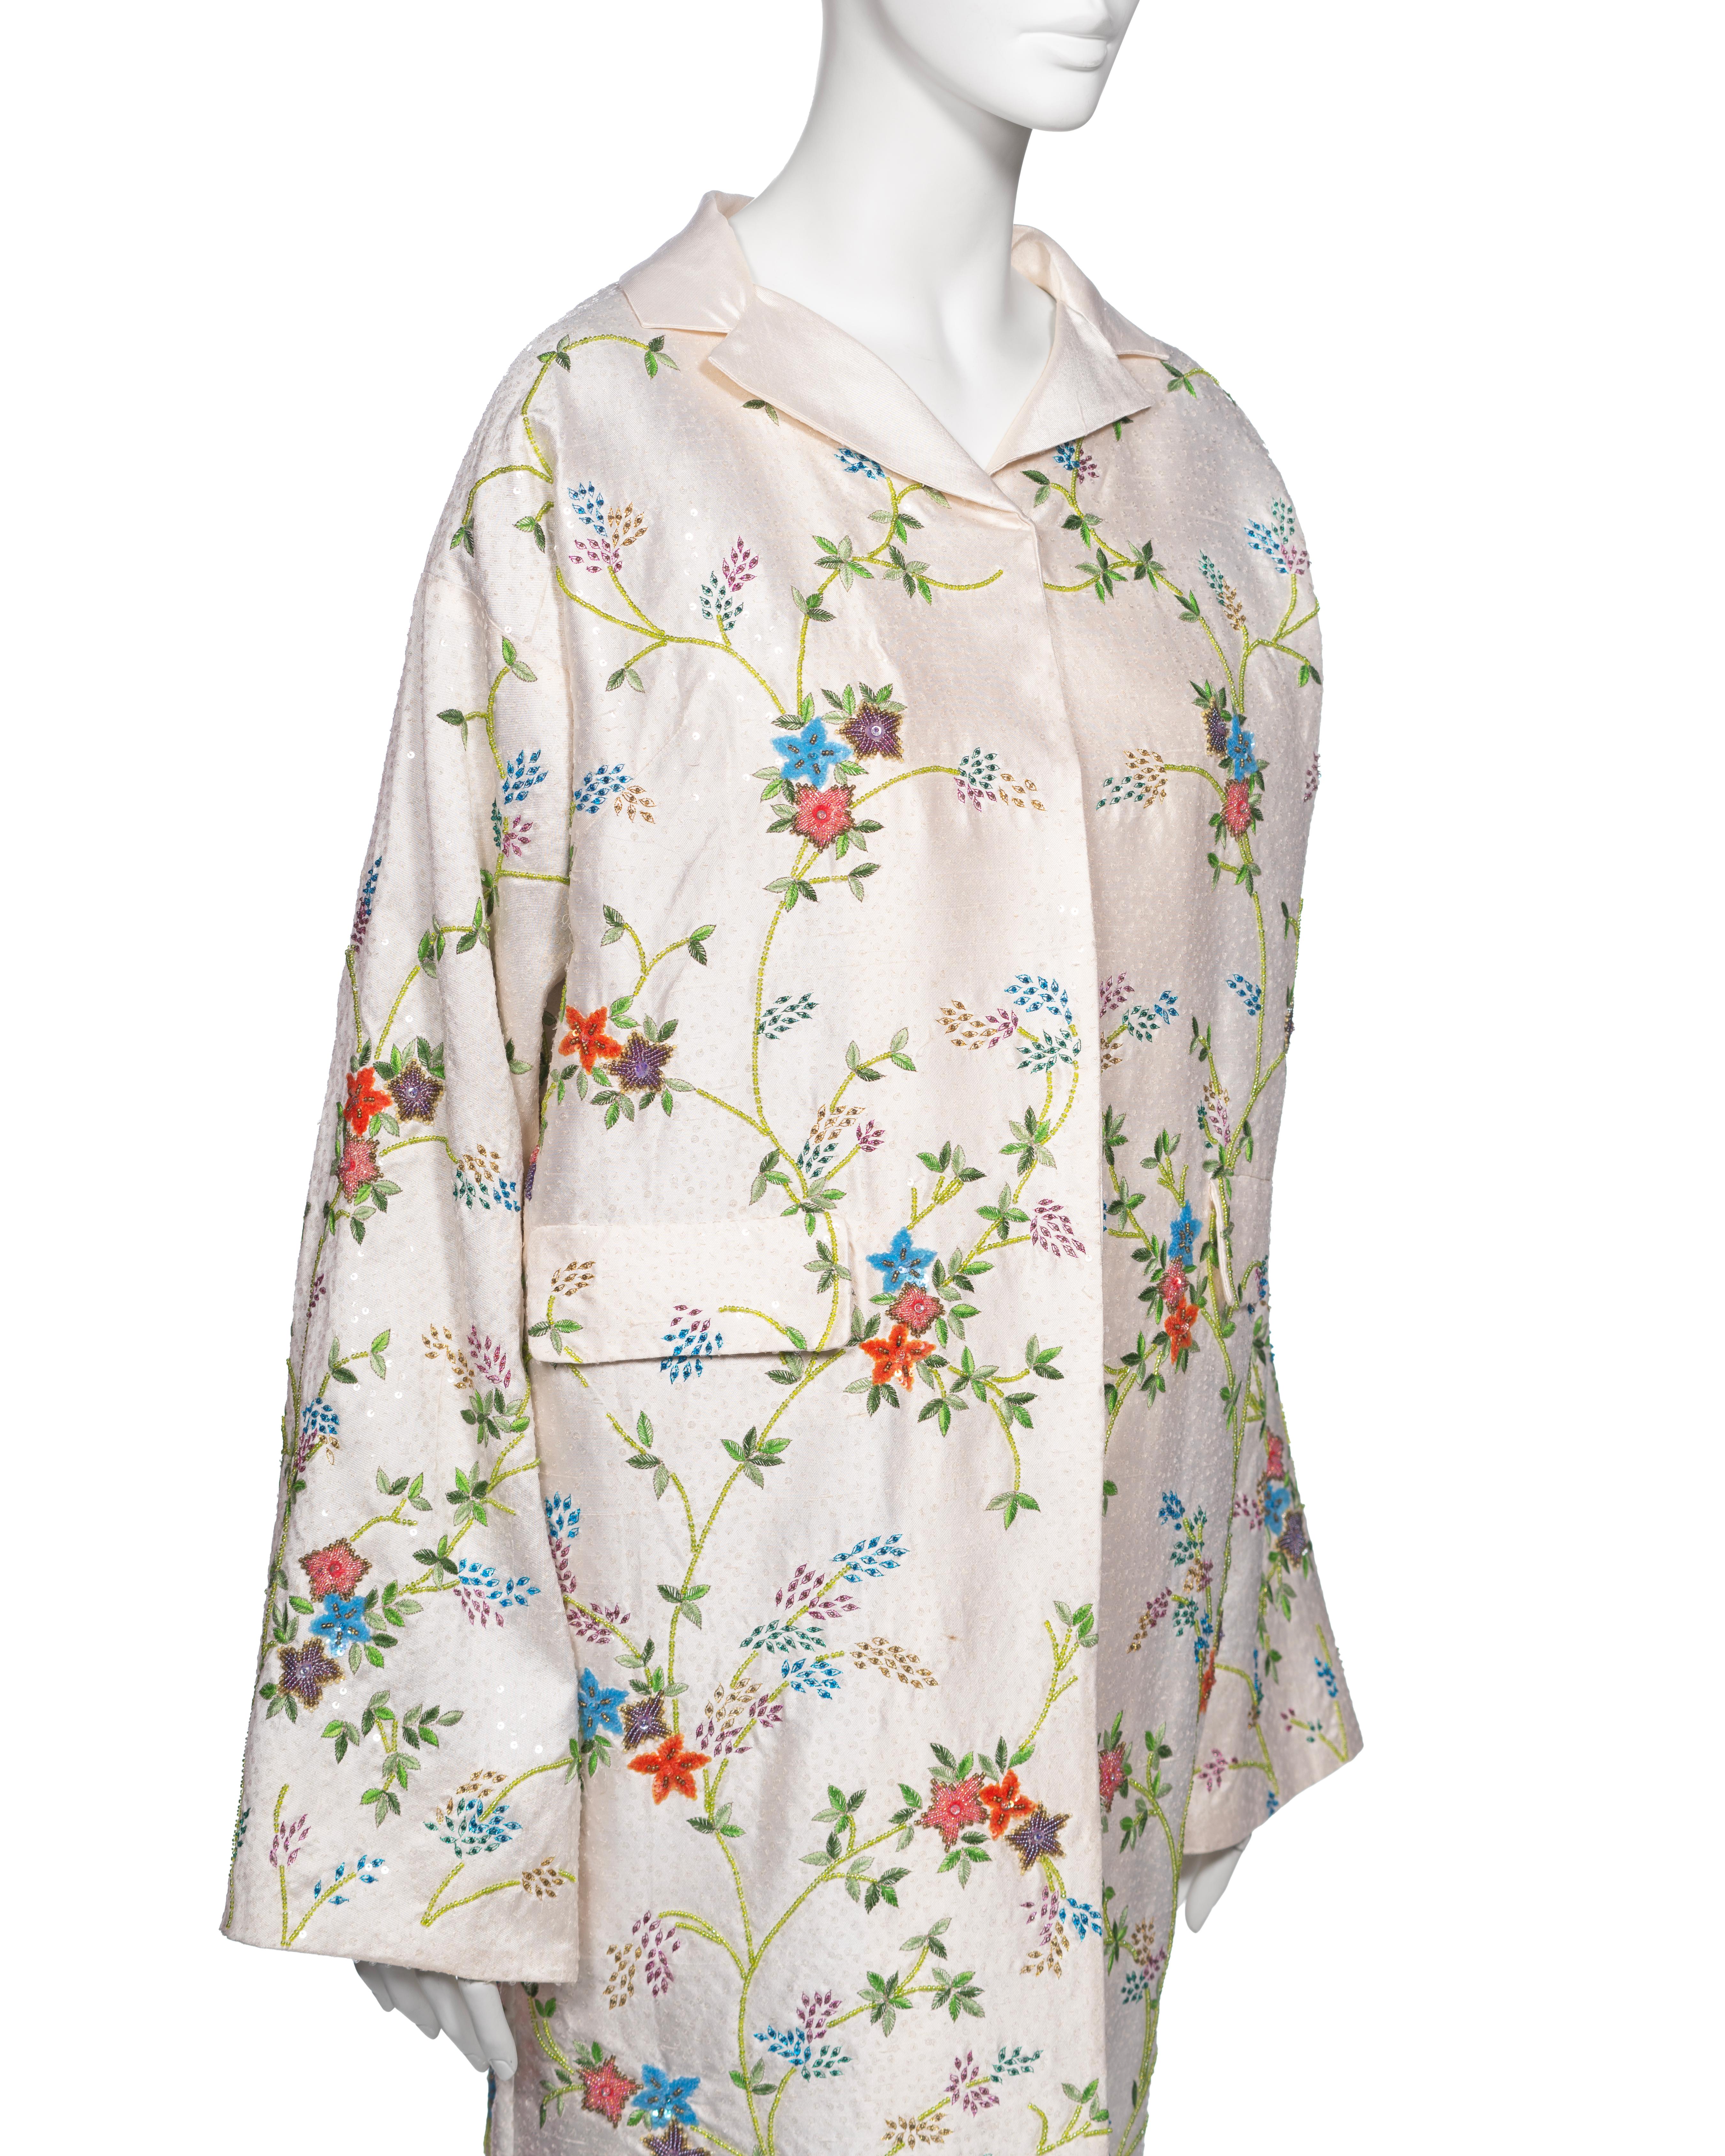 Dolce & Gabbana Hand-Embroidered White Raw Silk Evening Couture Coat, ss 1997 For Sale 5